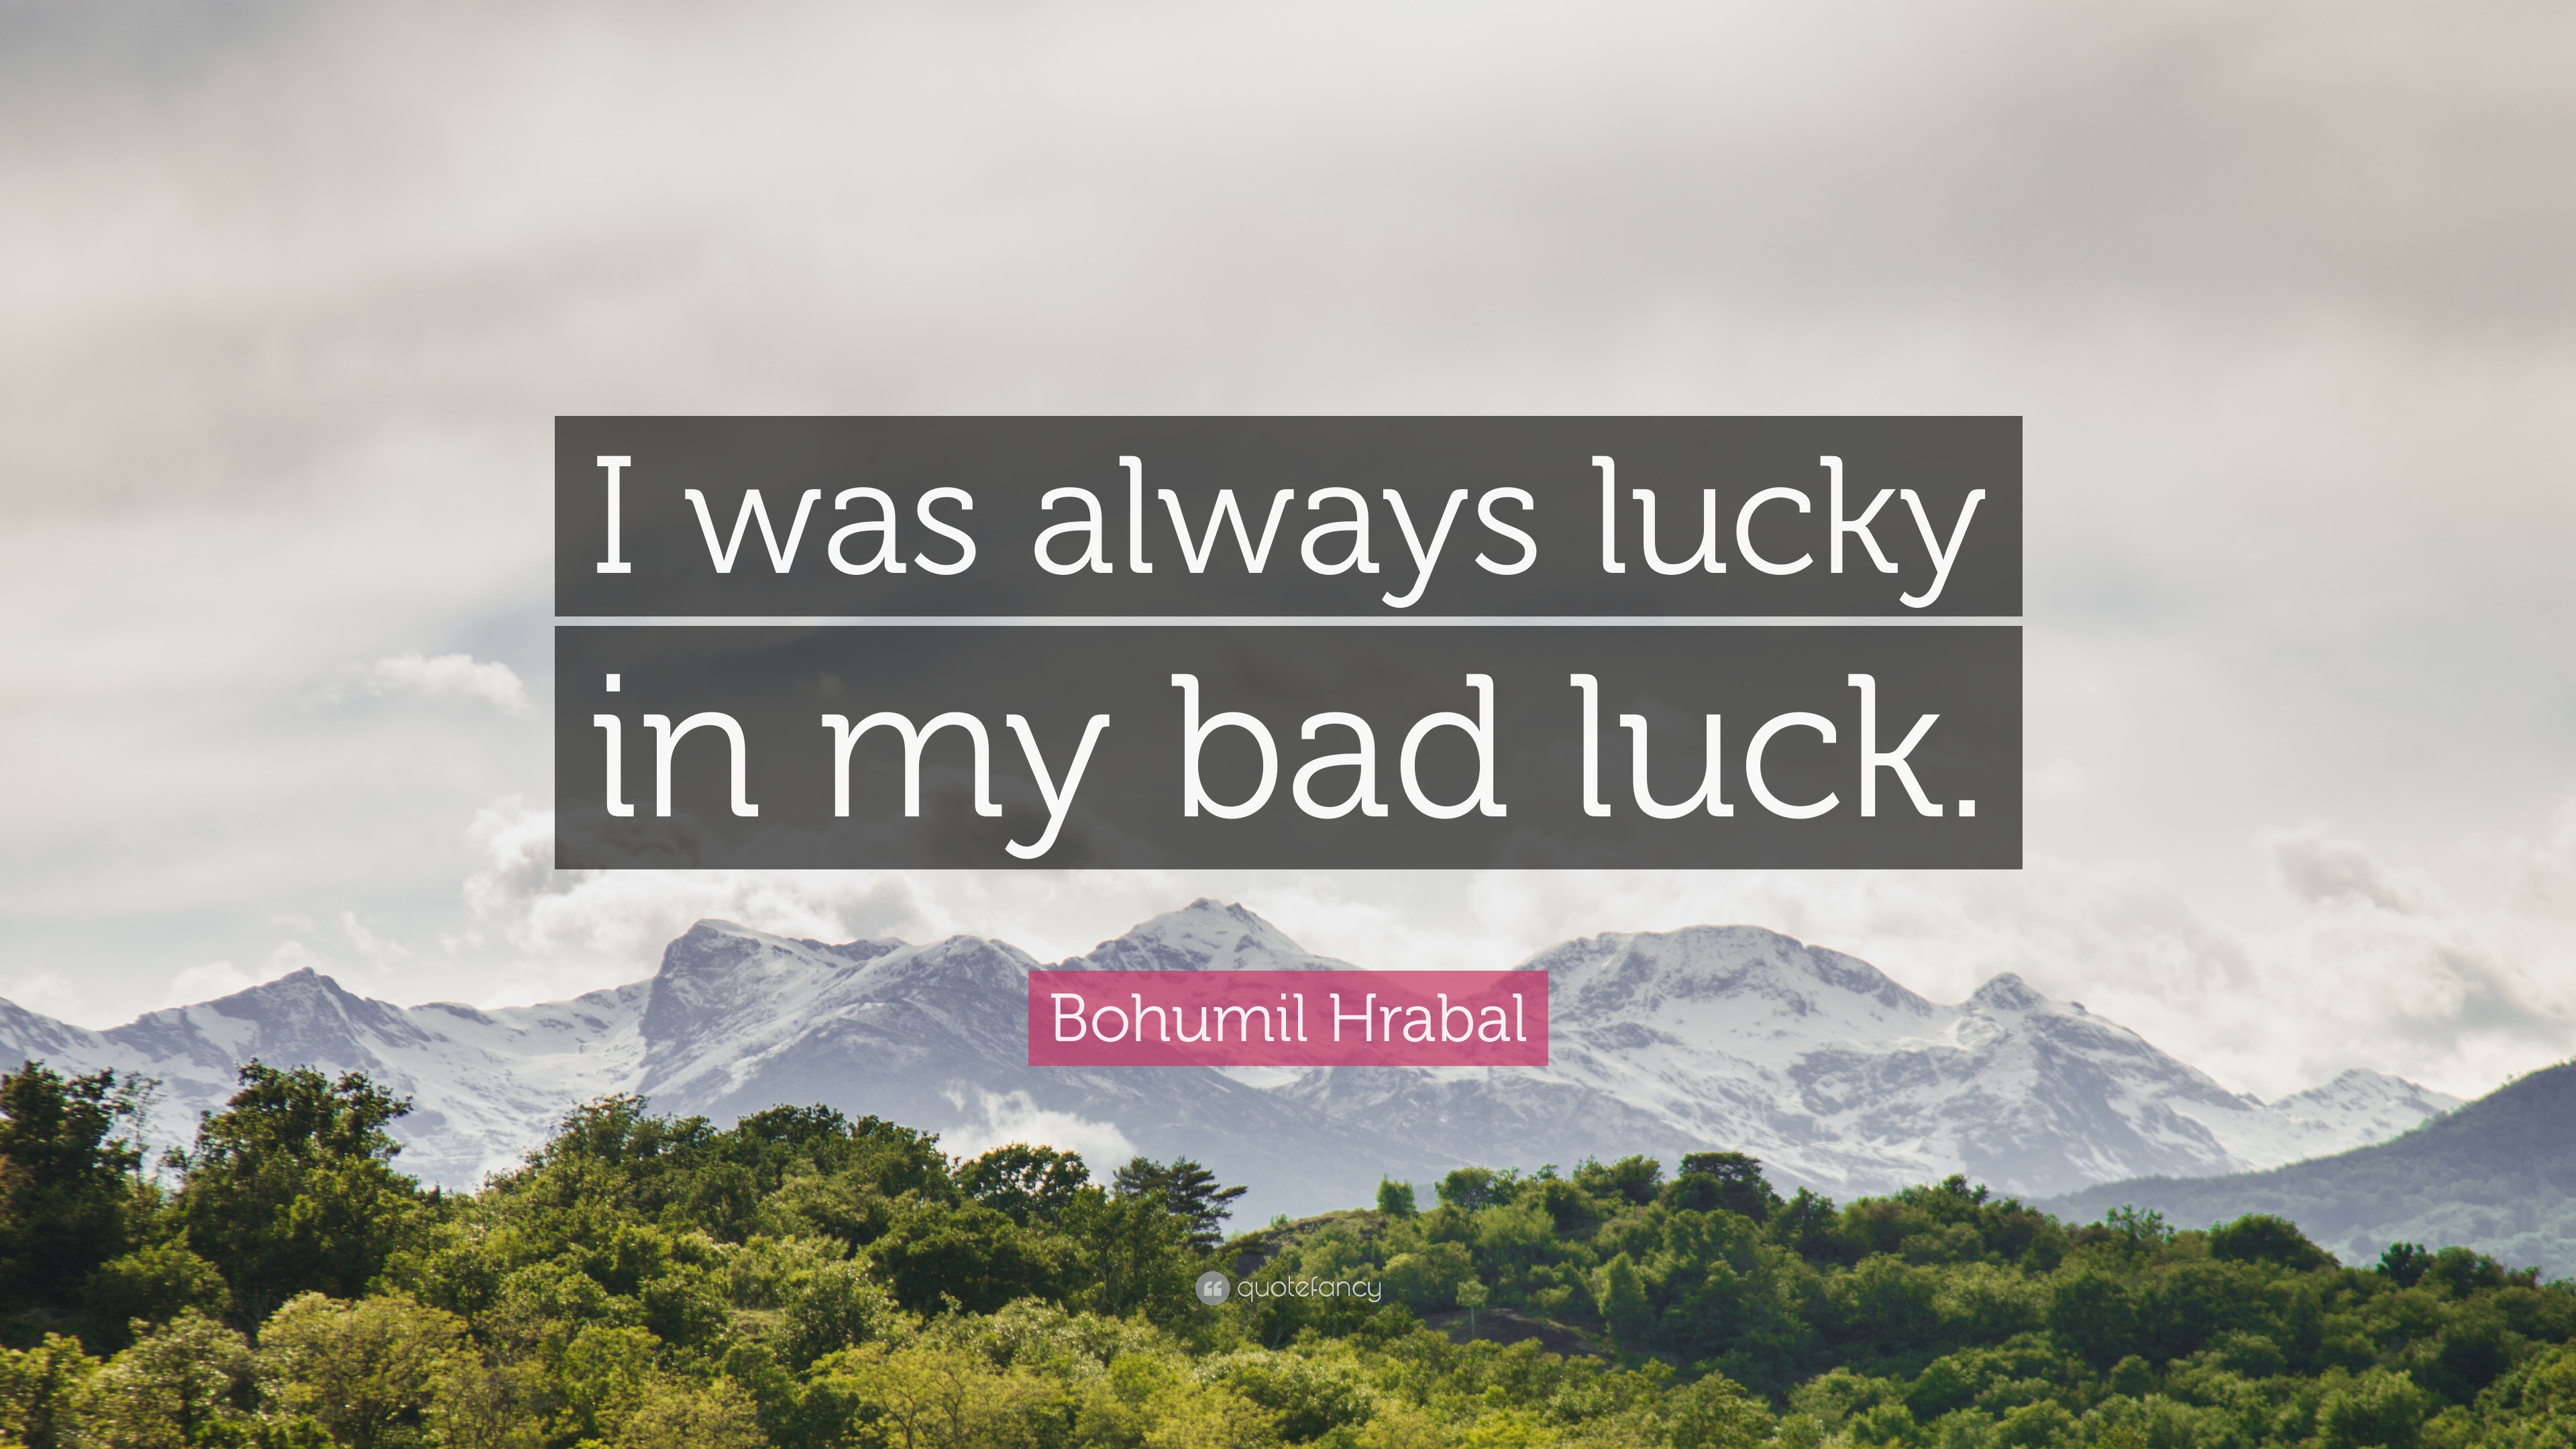 Bohumil Hrabal Quote: "I was always lucky in my bad luck. 